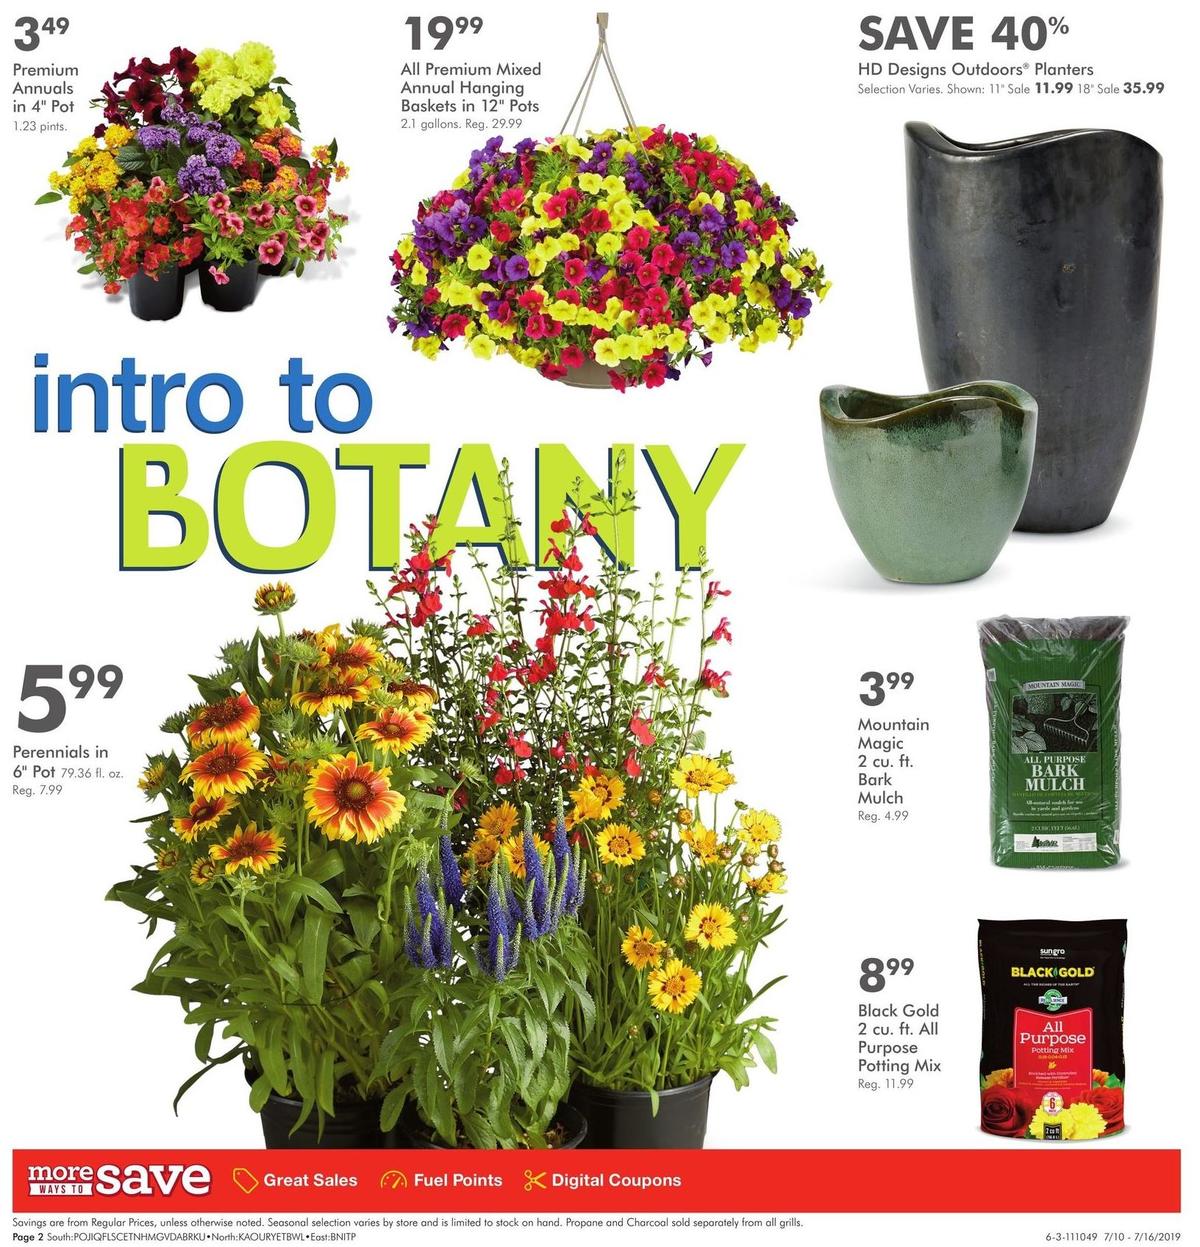 Fred Meyer General Merchandise Weekly Ad from July 10